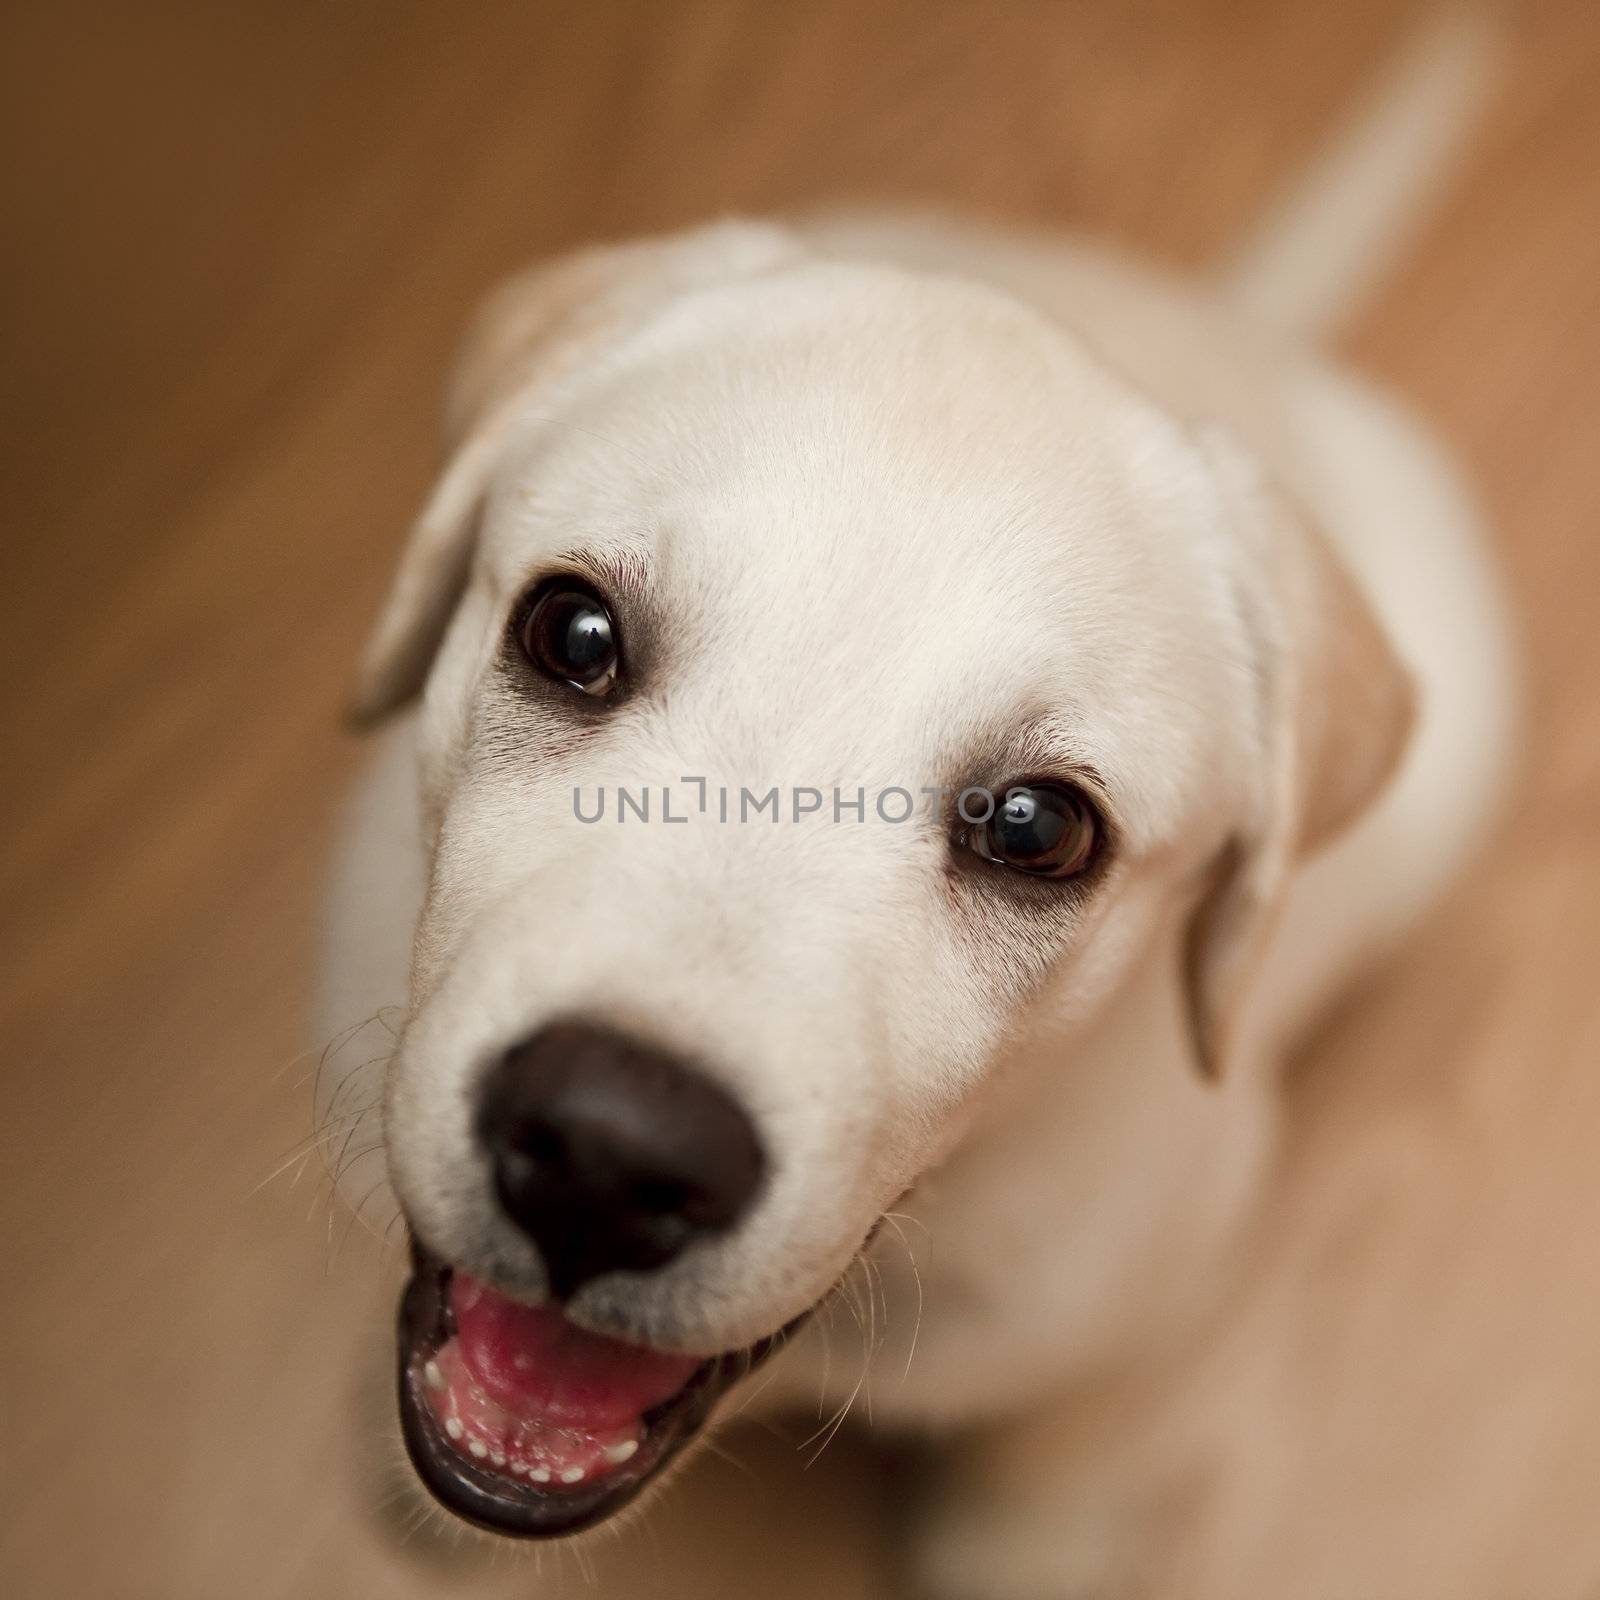 Top view of a labrador retriever puppy sitting on the floor